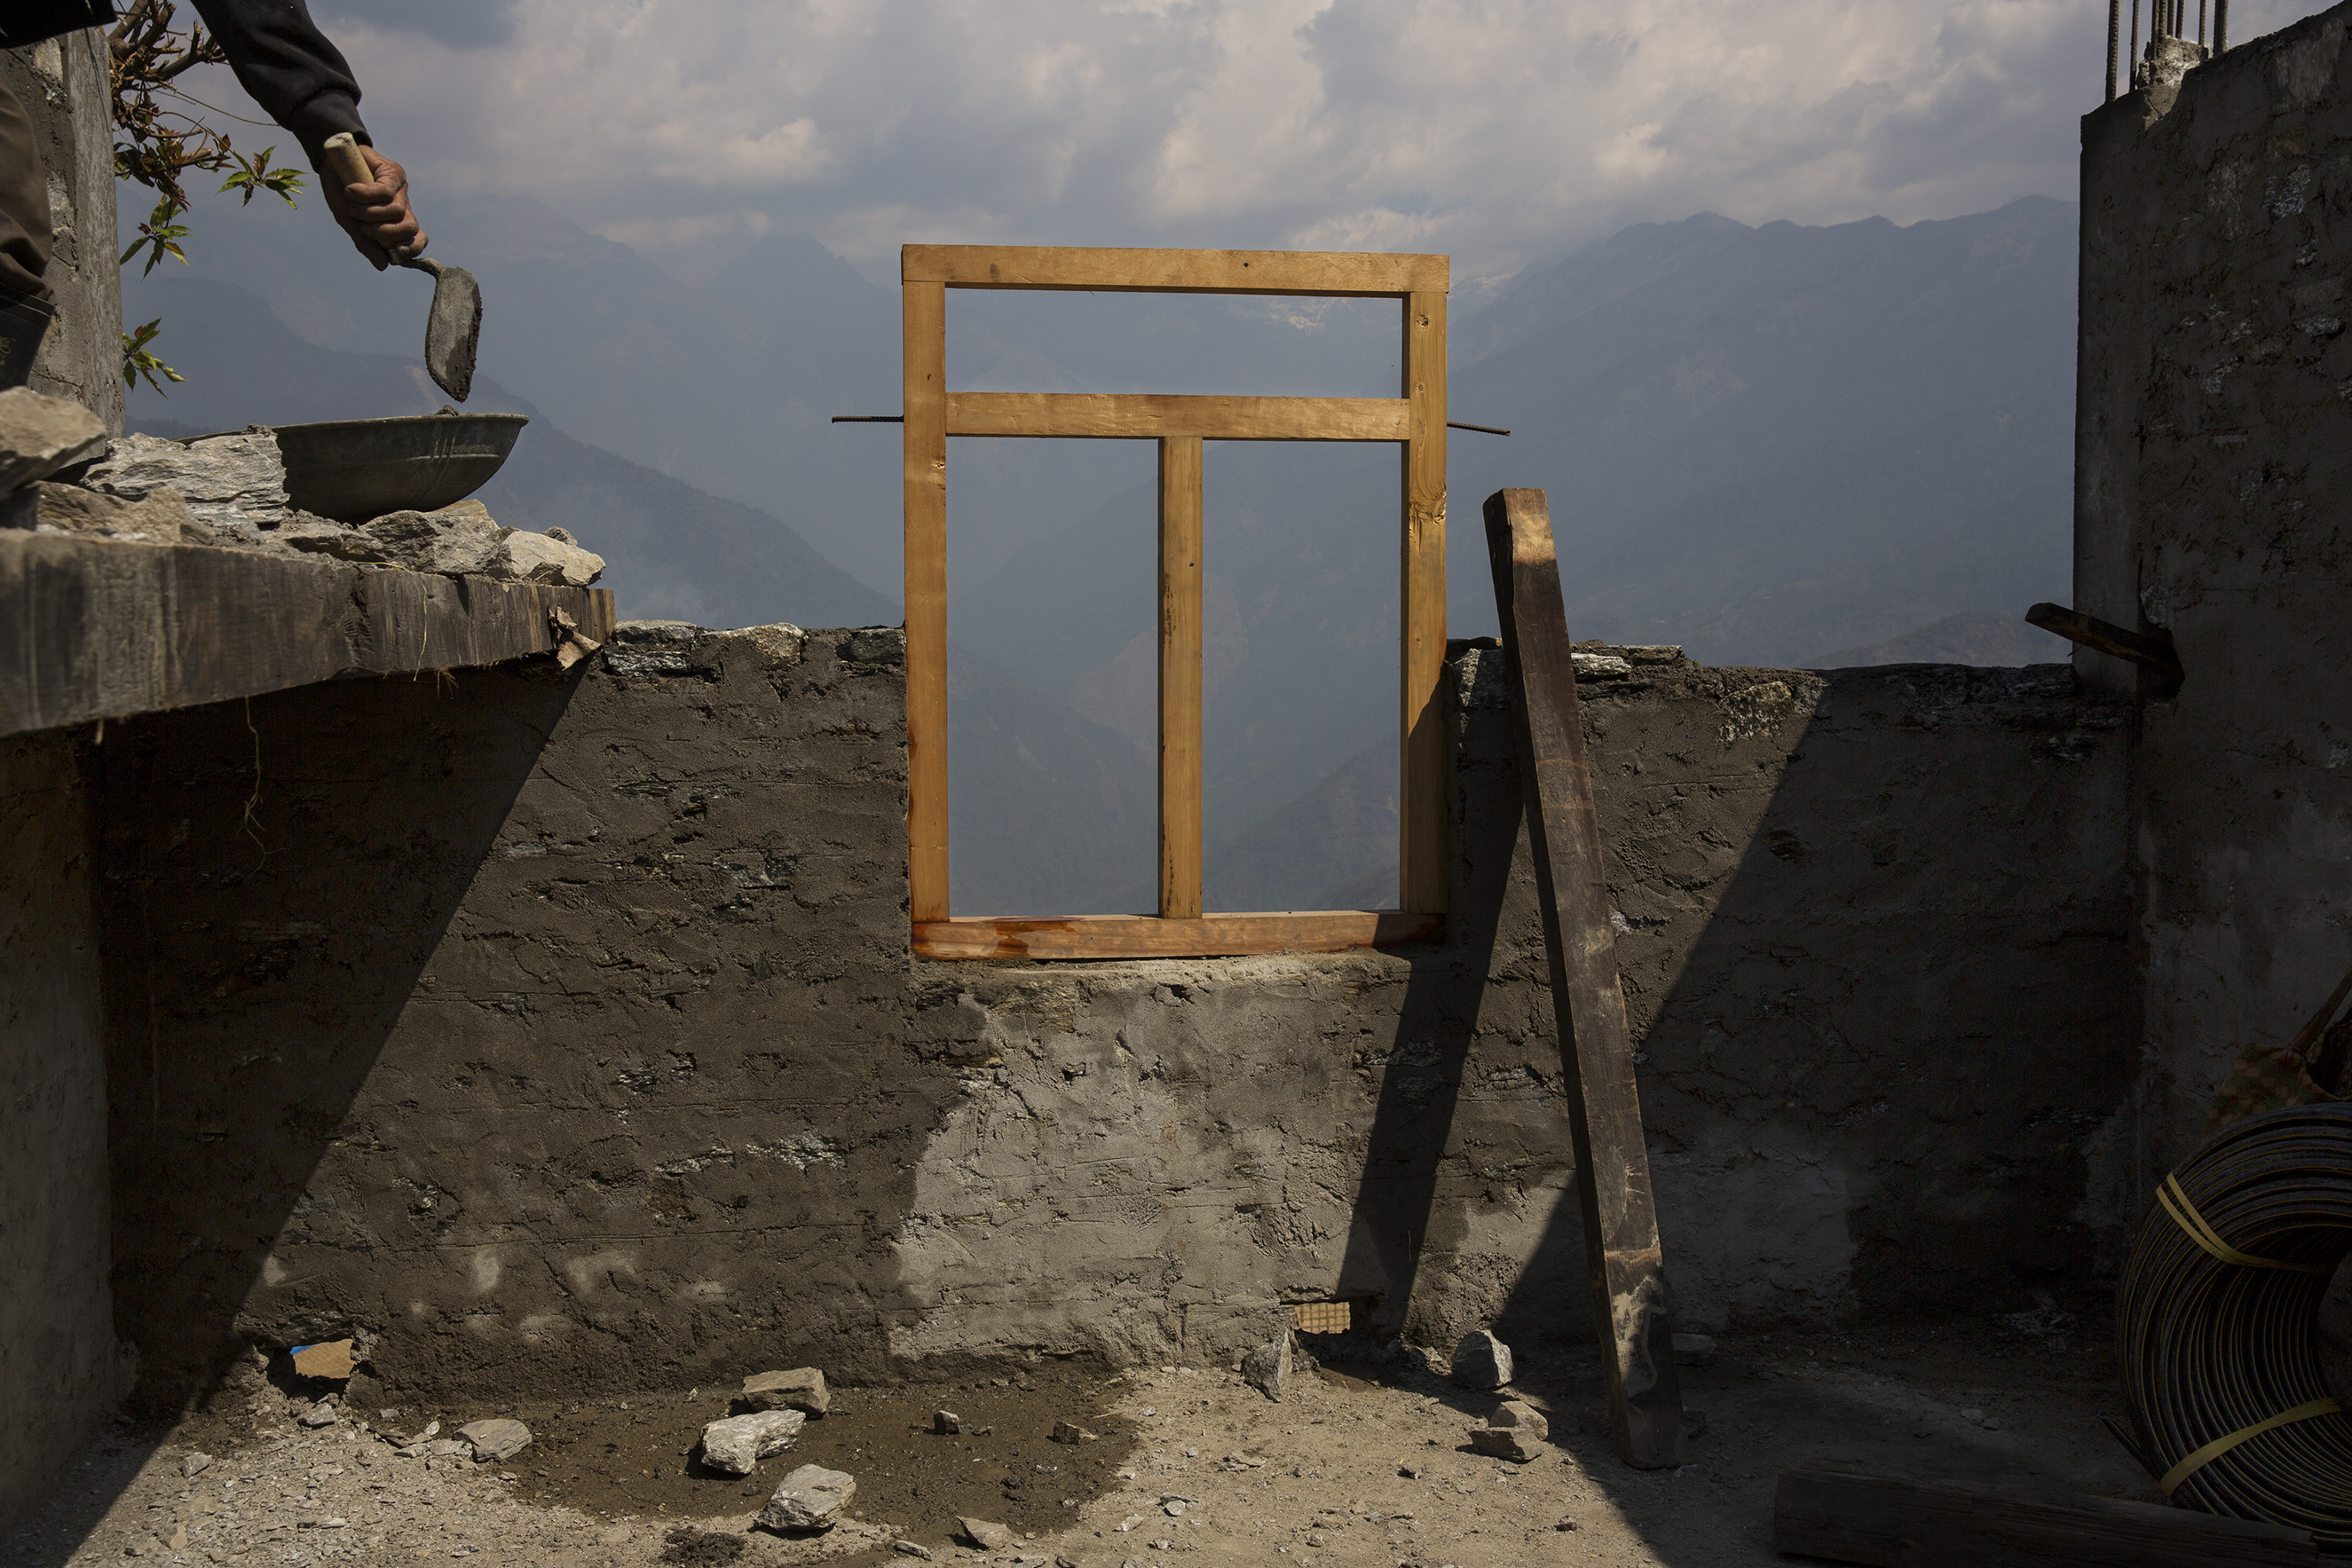 Approaching the first anniversary of Nepal's 2015 quakes, money from international donors has yet to reach victims. A political fight overtook reconstruction efforts, leaving villagers in communities like Barpak, needing to rebuild on their own, April 7, 2016.From  James Nachtwey: A Year After the Devastating Earthquake